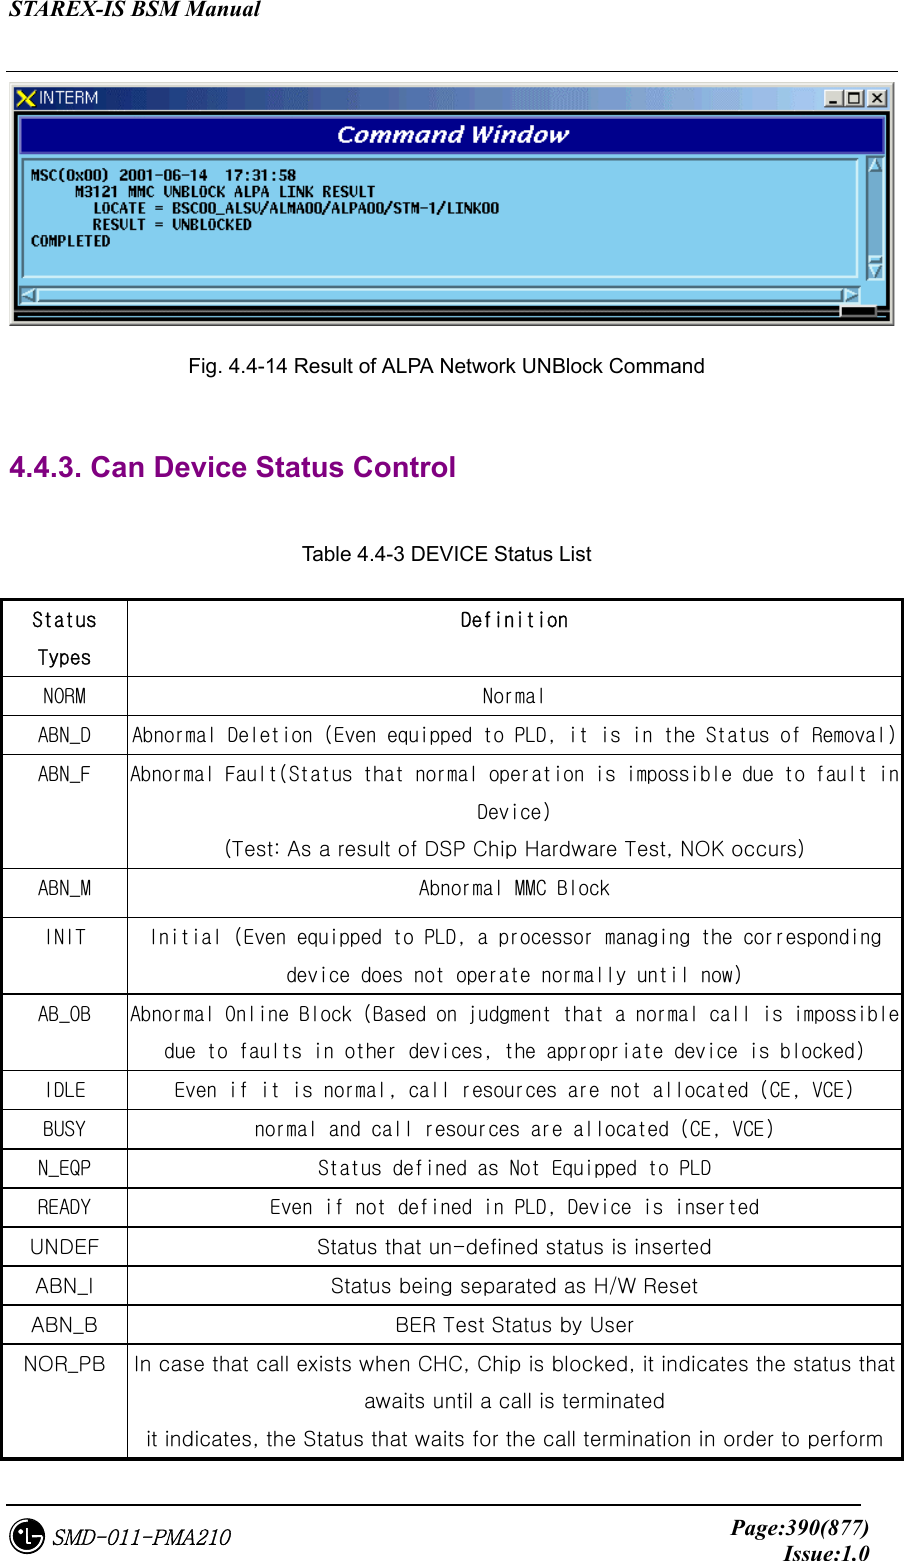 STAREX-IS BSM Manual     Page:390(877)Issue:1.0SMD-011-PMA210  Fig. 4.4-14 Result of ALPA Network UNBlock Command  4.4.3. Can Device Status Control  Table 4.4-3 DEVICE Status List Status Types Definition NORM  Normal ABN_D  Abnormal Deletion (Even equipped to PLD, it is in the Status of Removal) ABN_F  Abnormal Fault(Status that normal operation is impossible due to fault in Device) (Test: As a result of DSP Chip Hardware Test, NOK occurs) ABN_M  Abnormal MMC Block INIT  Initial (Even equipped to PLD, a processor managing the corresponding device does not operate normally until now) AB_OB  Abnormal Online Block (Based on judgment that a normal call is impossible due to faults in other devices, the appropriate device is blocked) IDLE  Even if it is normal, call resources are not allocated (CE, VCE) BUSY  normal and call resources are allocated (CE, VCE) N_EQP  Status defined as Not Equipped to PLD READY  Even if not defined in PLD, Device is inserted UNDEF  Status that un-defined status is inserted ABN_I  Status being separated as H/W Reset ABN_B  BER Test Status by User NOR_PB  In case that call exists when CHC, Chip is blocked, it indicates the status that awaits until a call is terminated it indicates, the Status that waits for the call termination in order to perform 